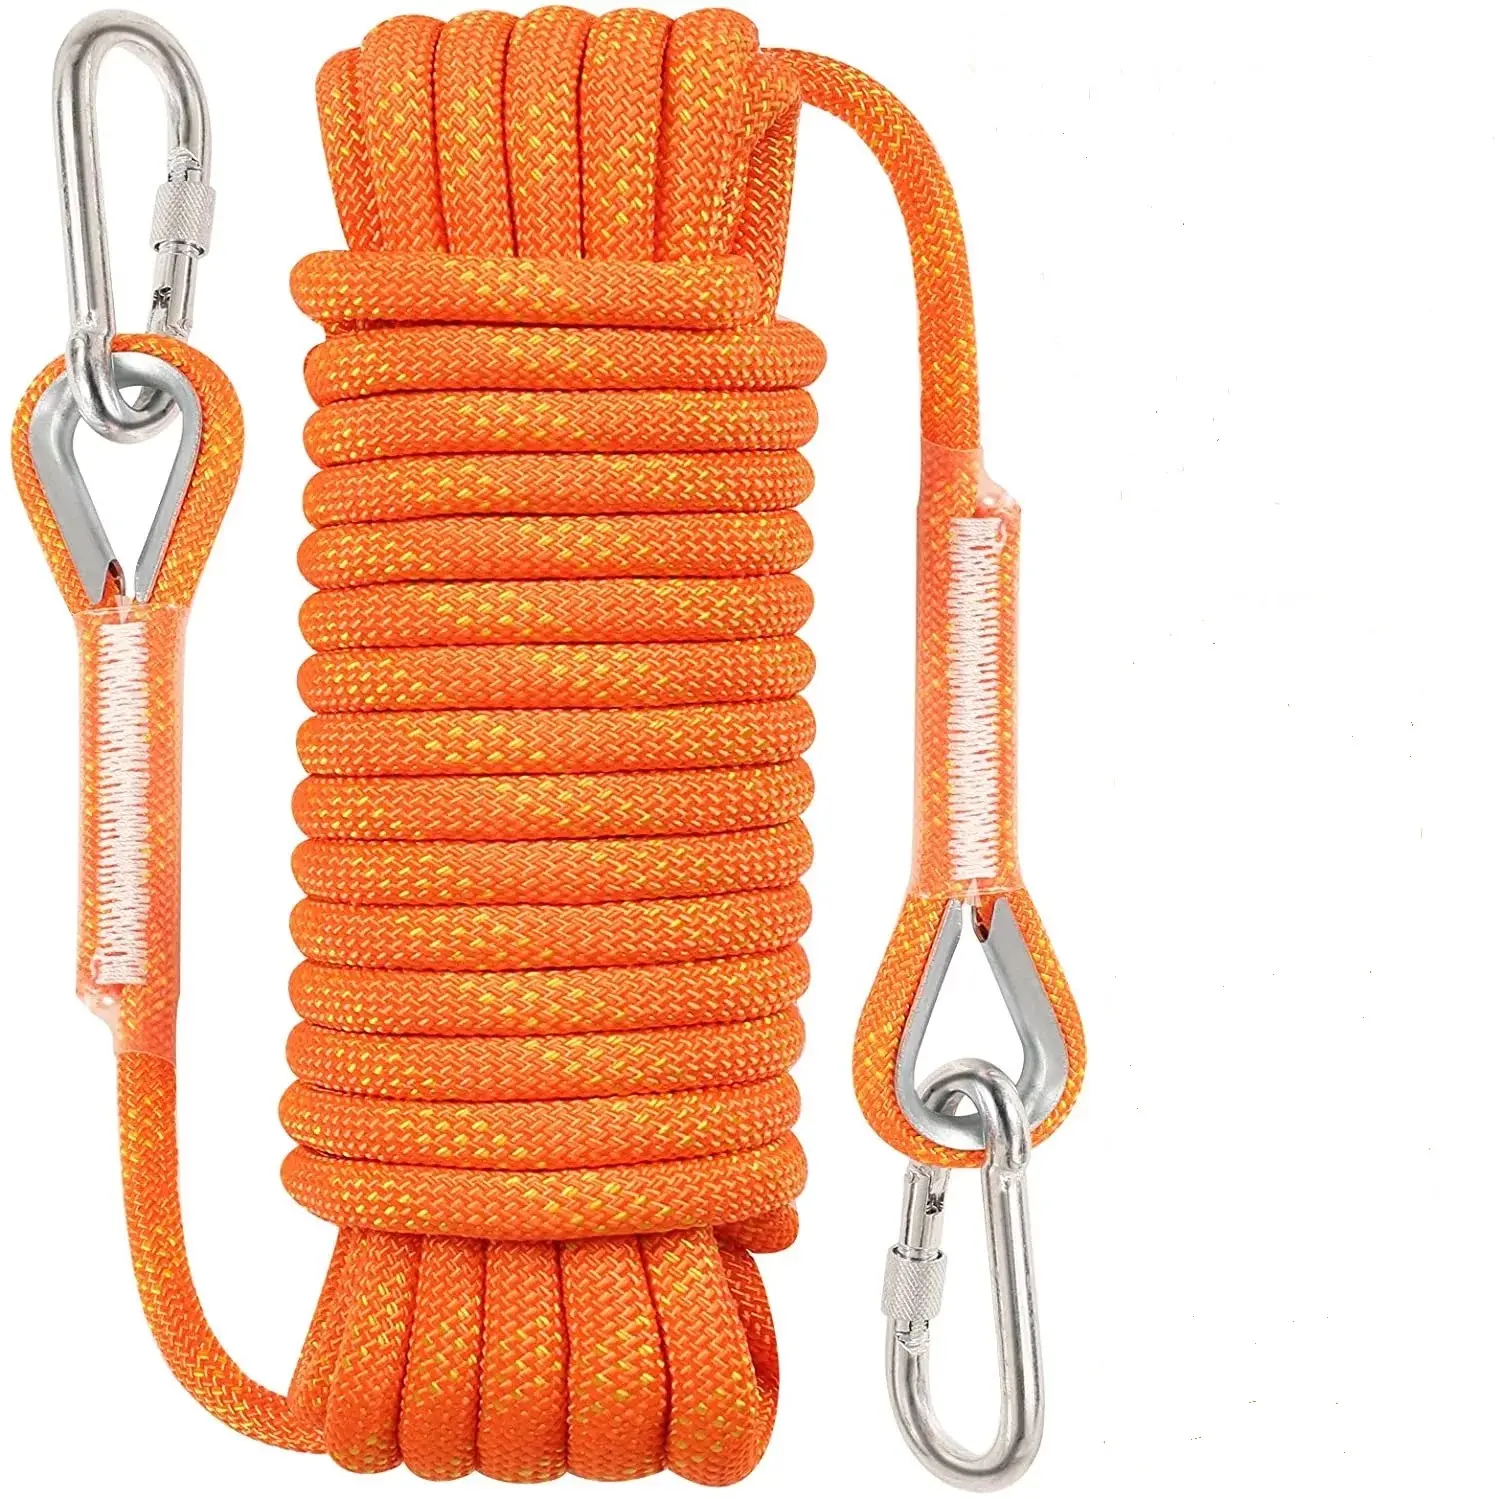 High strength climbing gear climbing rope, static rope outdoor survival braided rope